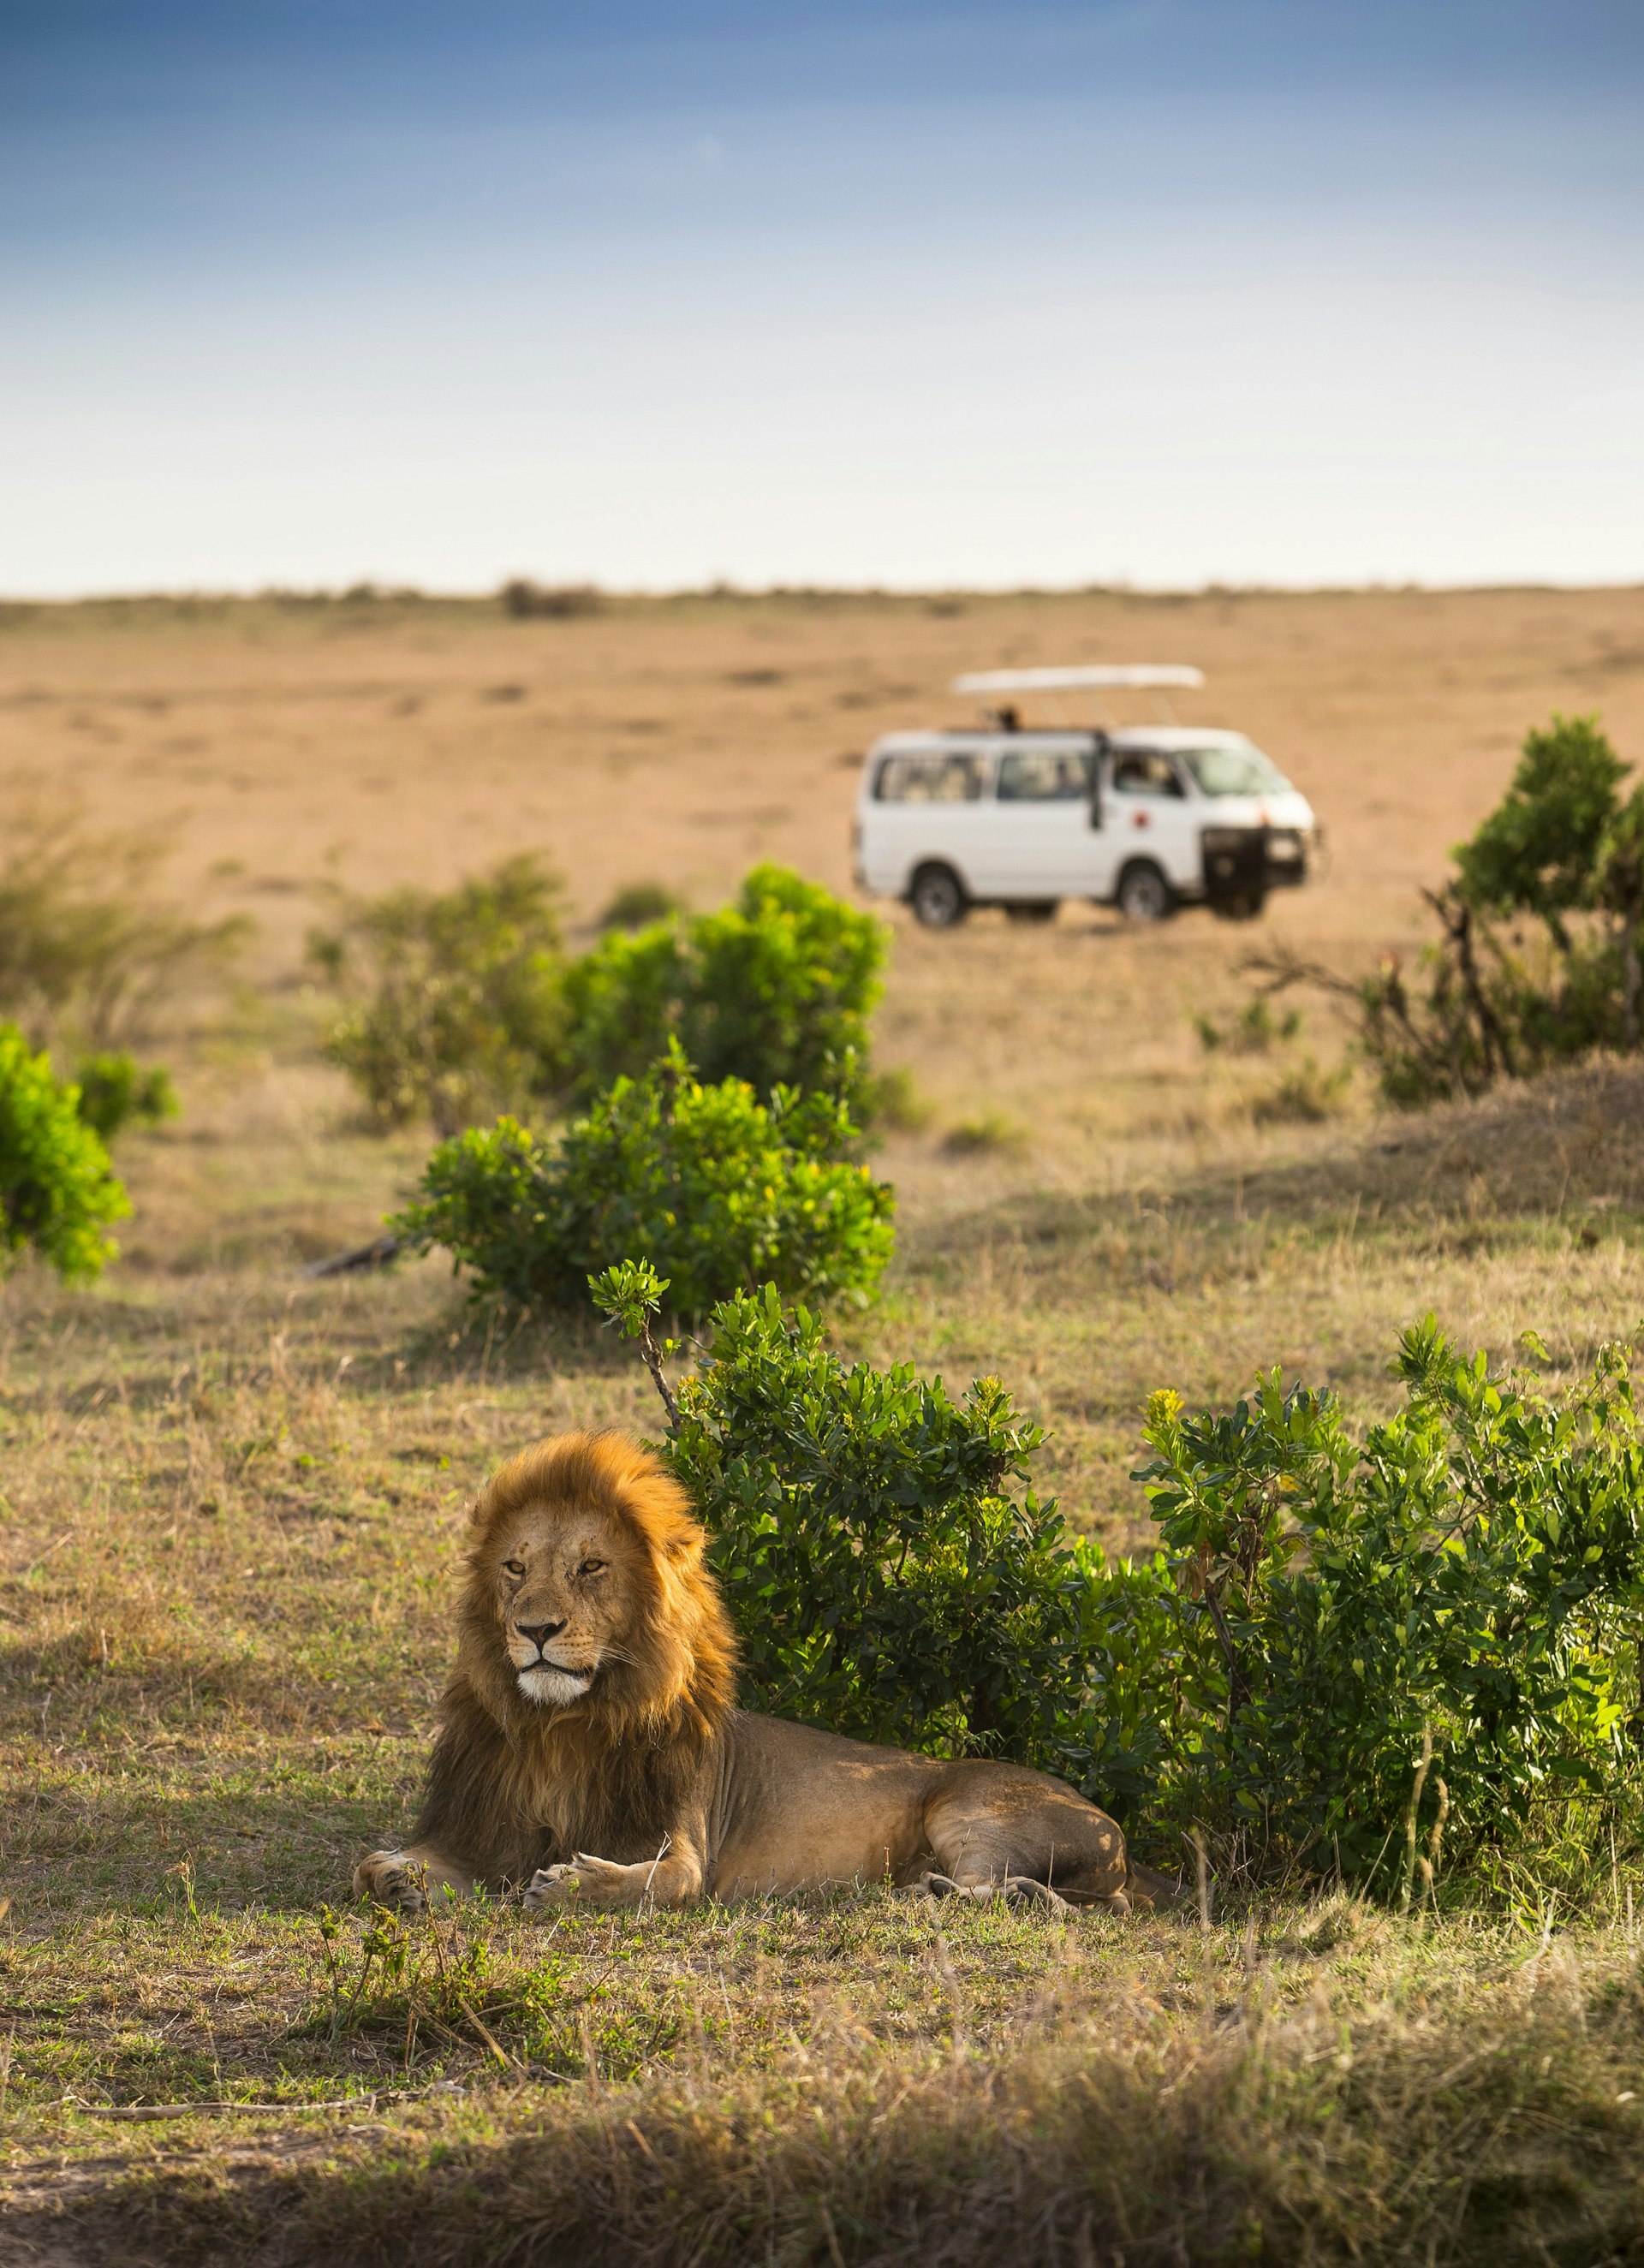 A minibus with a pop-up roof sits in the distance, with a large male lion laying in the foreground; the image is on an open savannah.